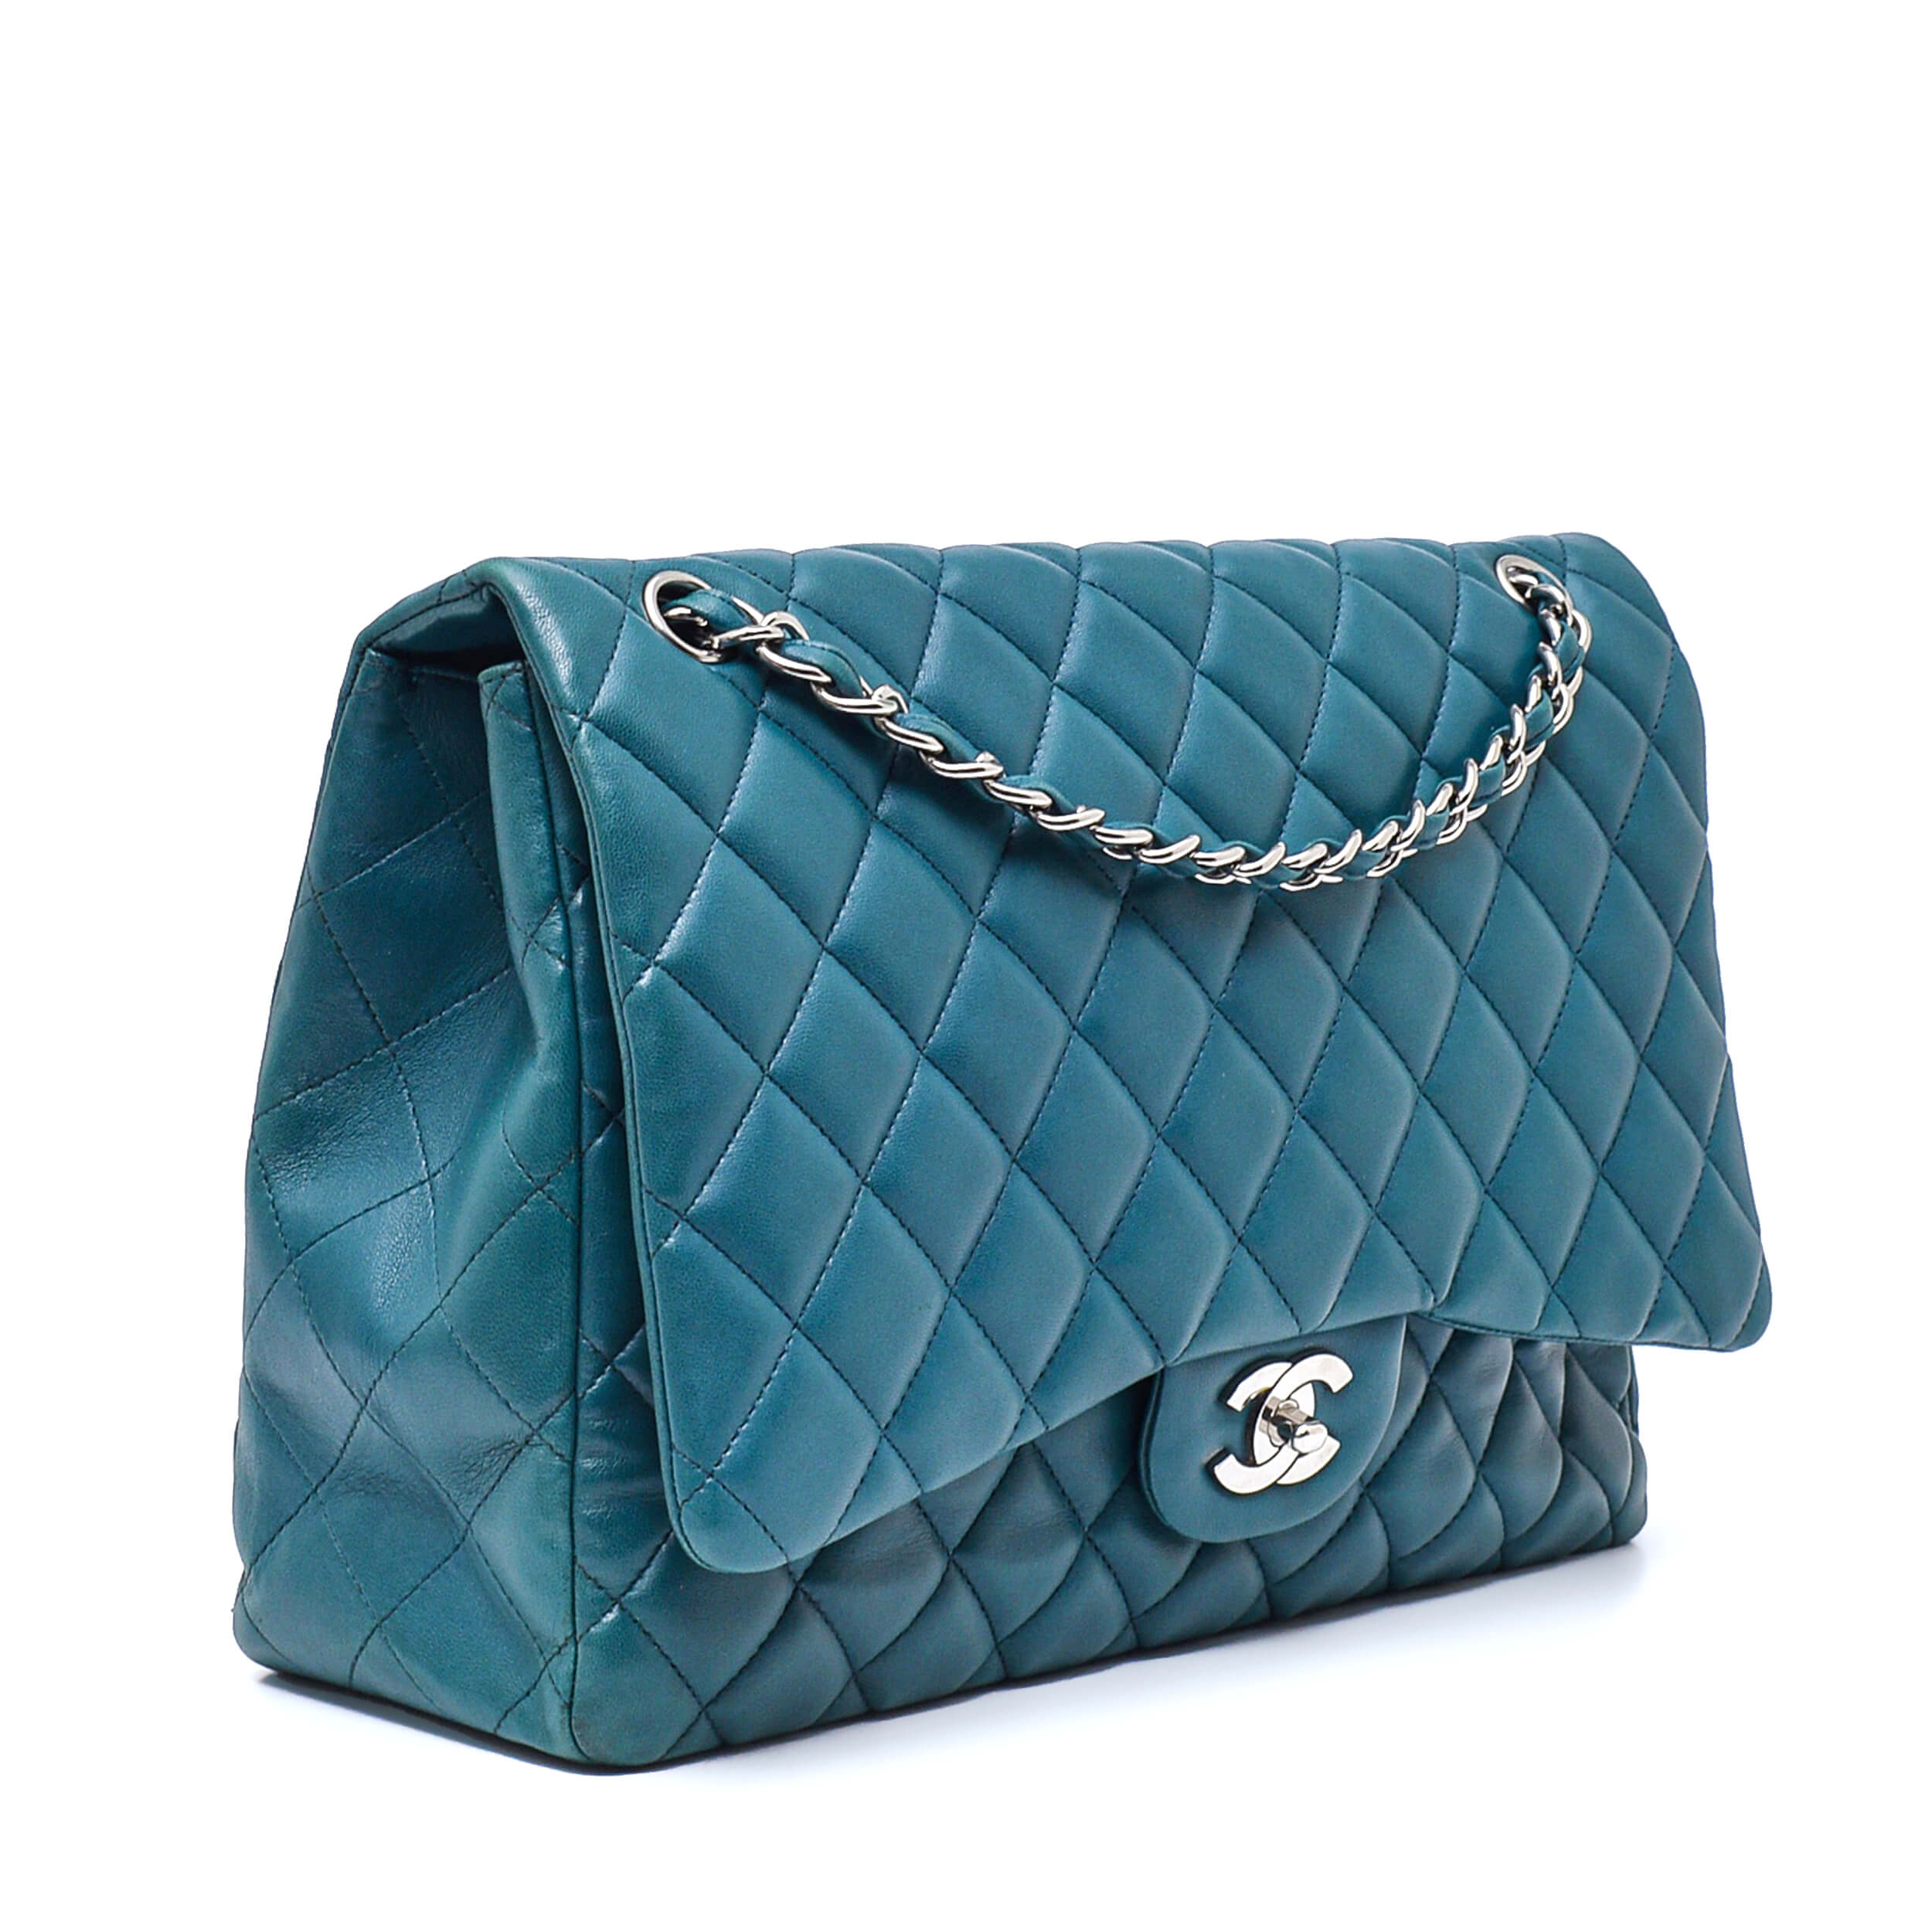 Chanel - Turquoise Quilted Lambskin Leather Maxi Jumbo Single Flap Bag